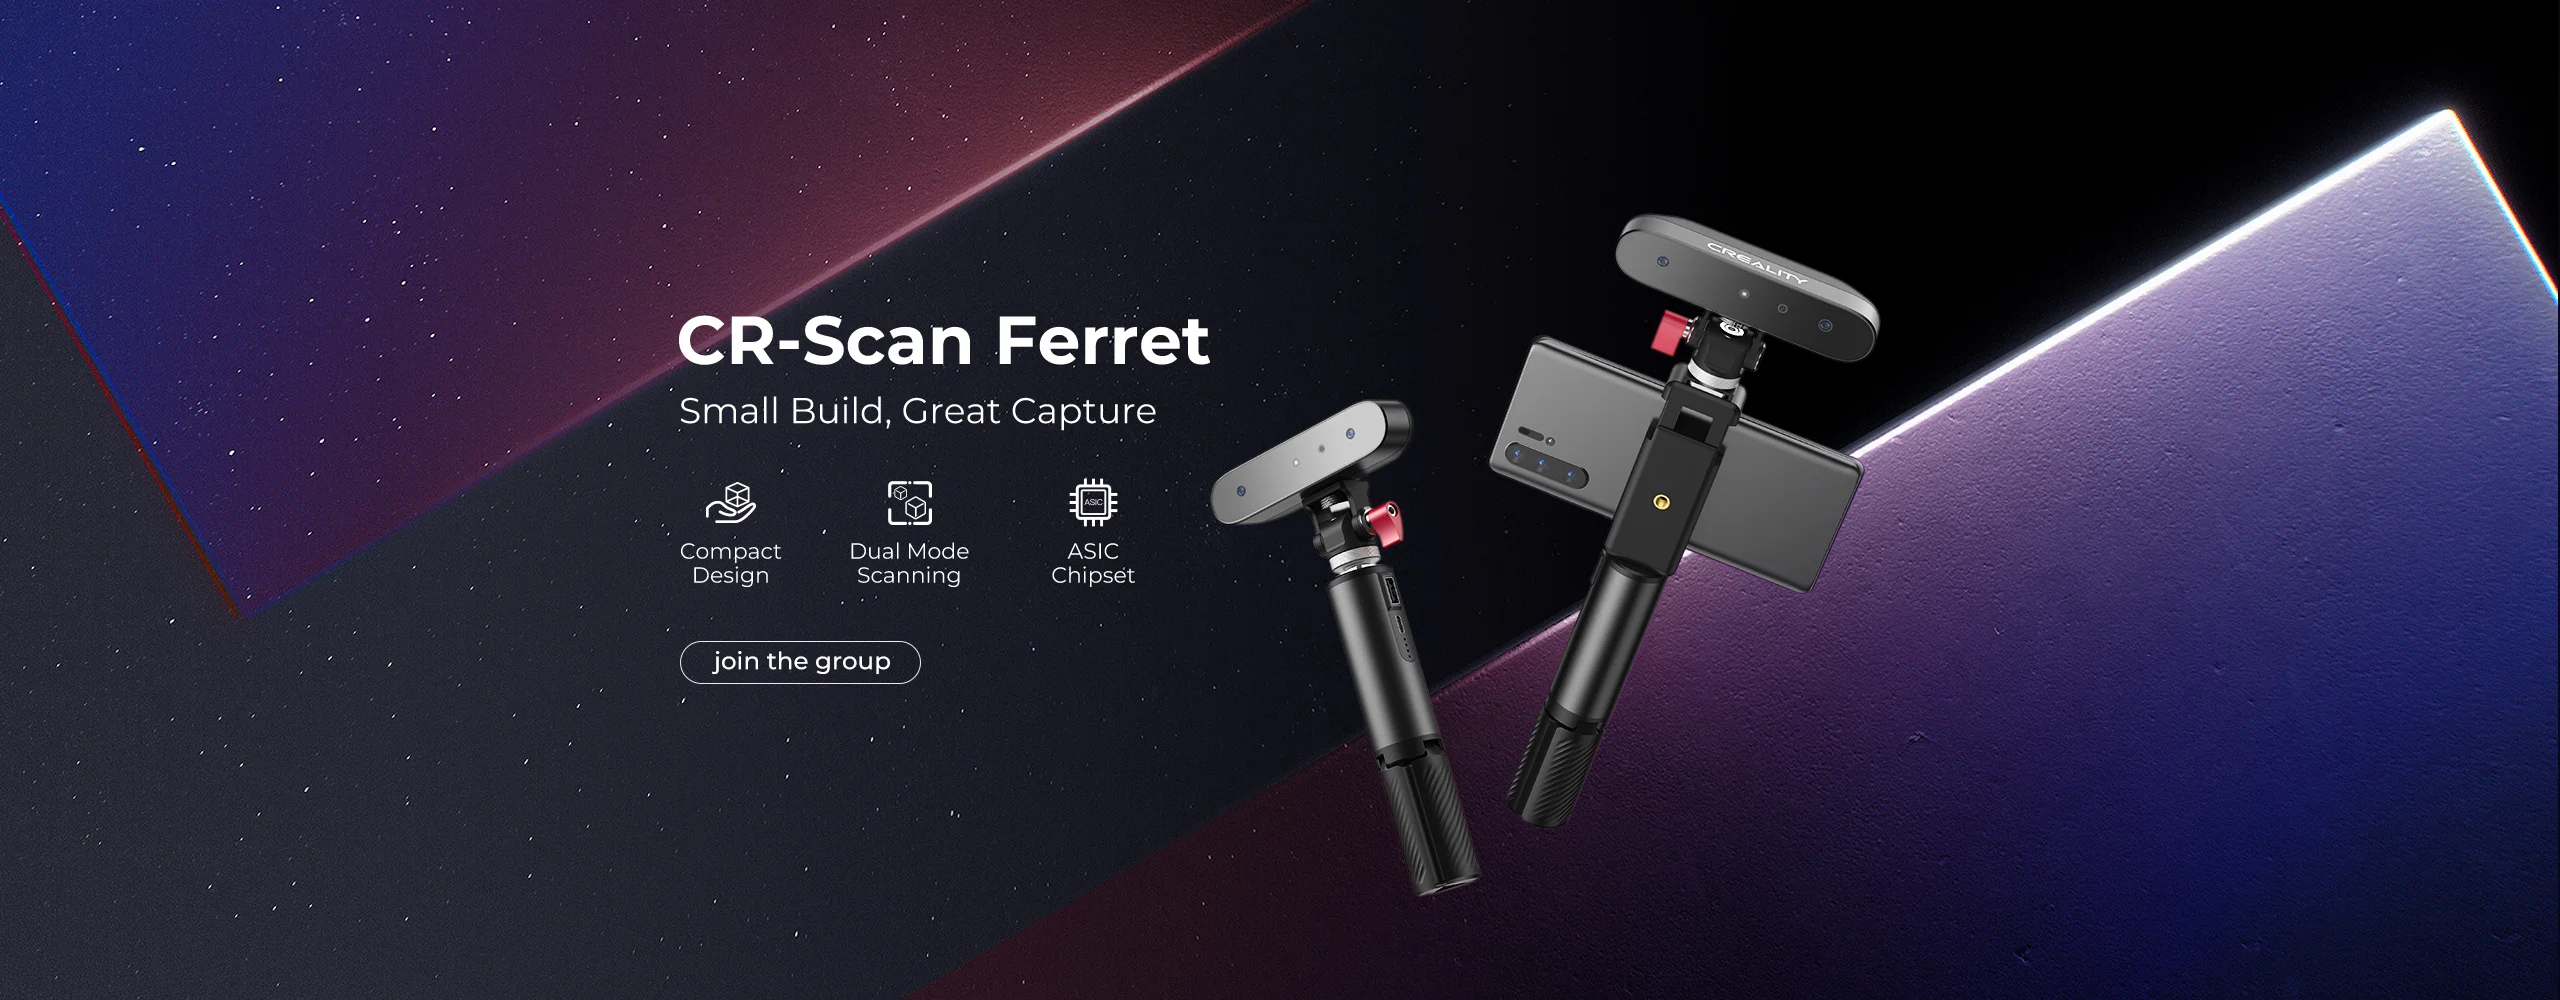 Creality CR-Scan Ferret 3D Scanner for €256 with Coupon - GEEKBUYING